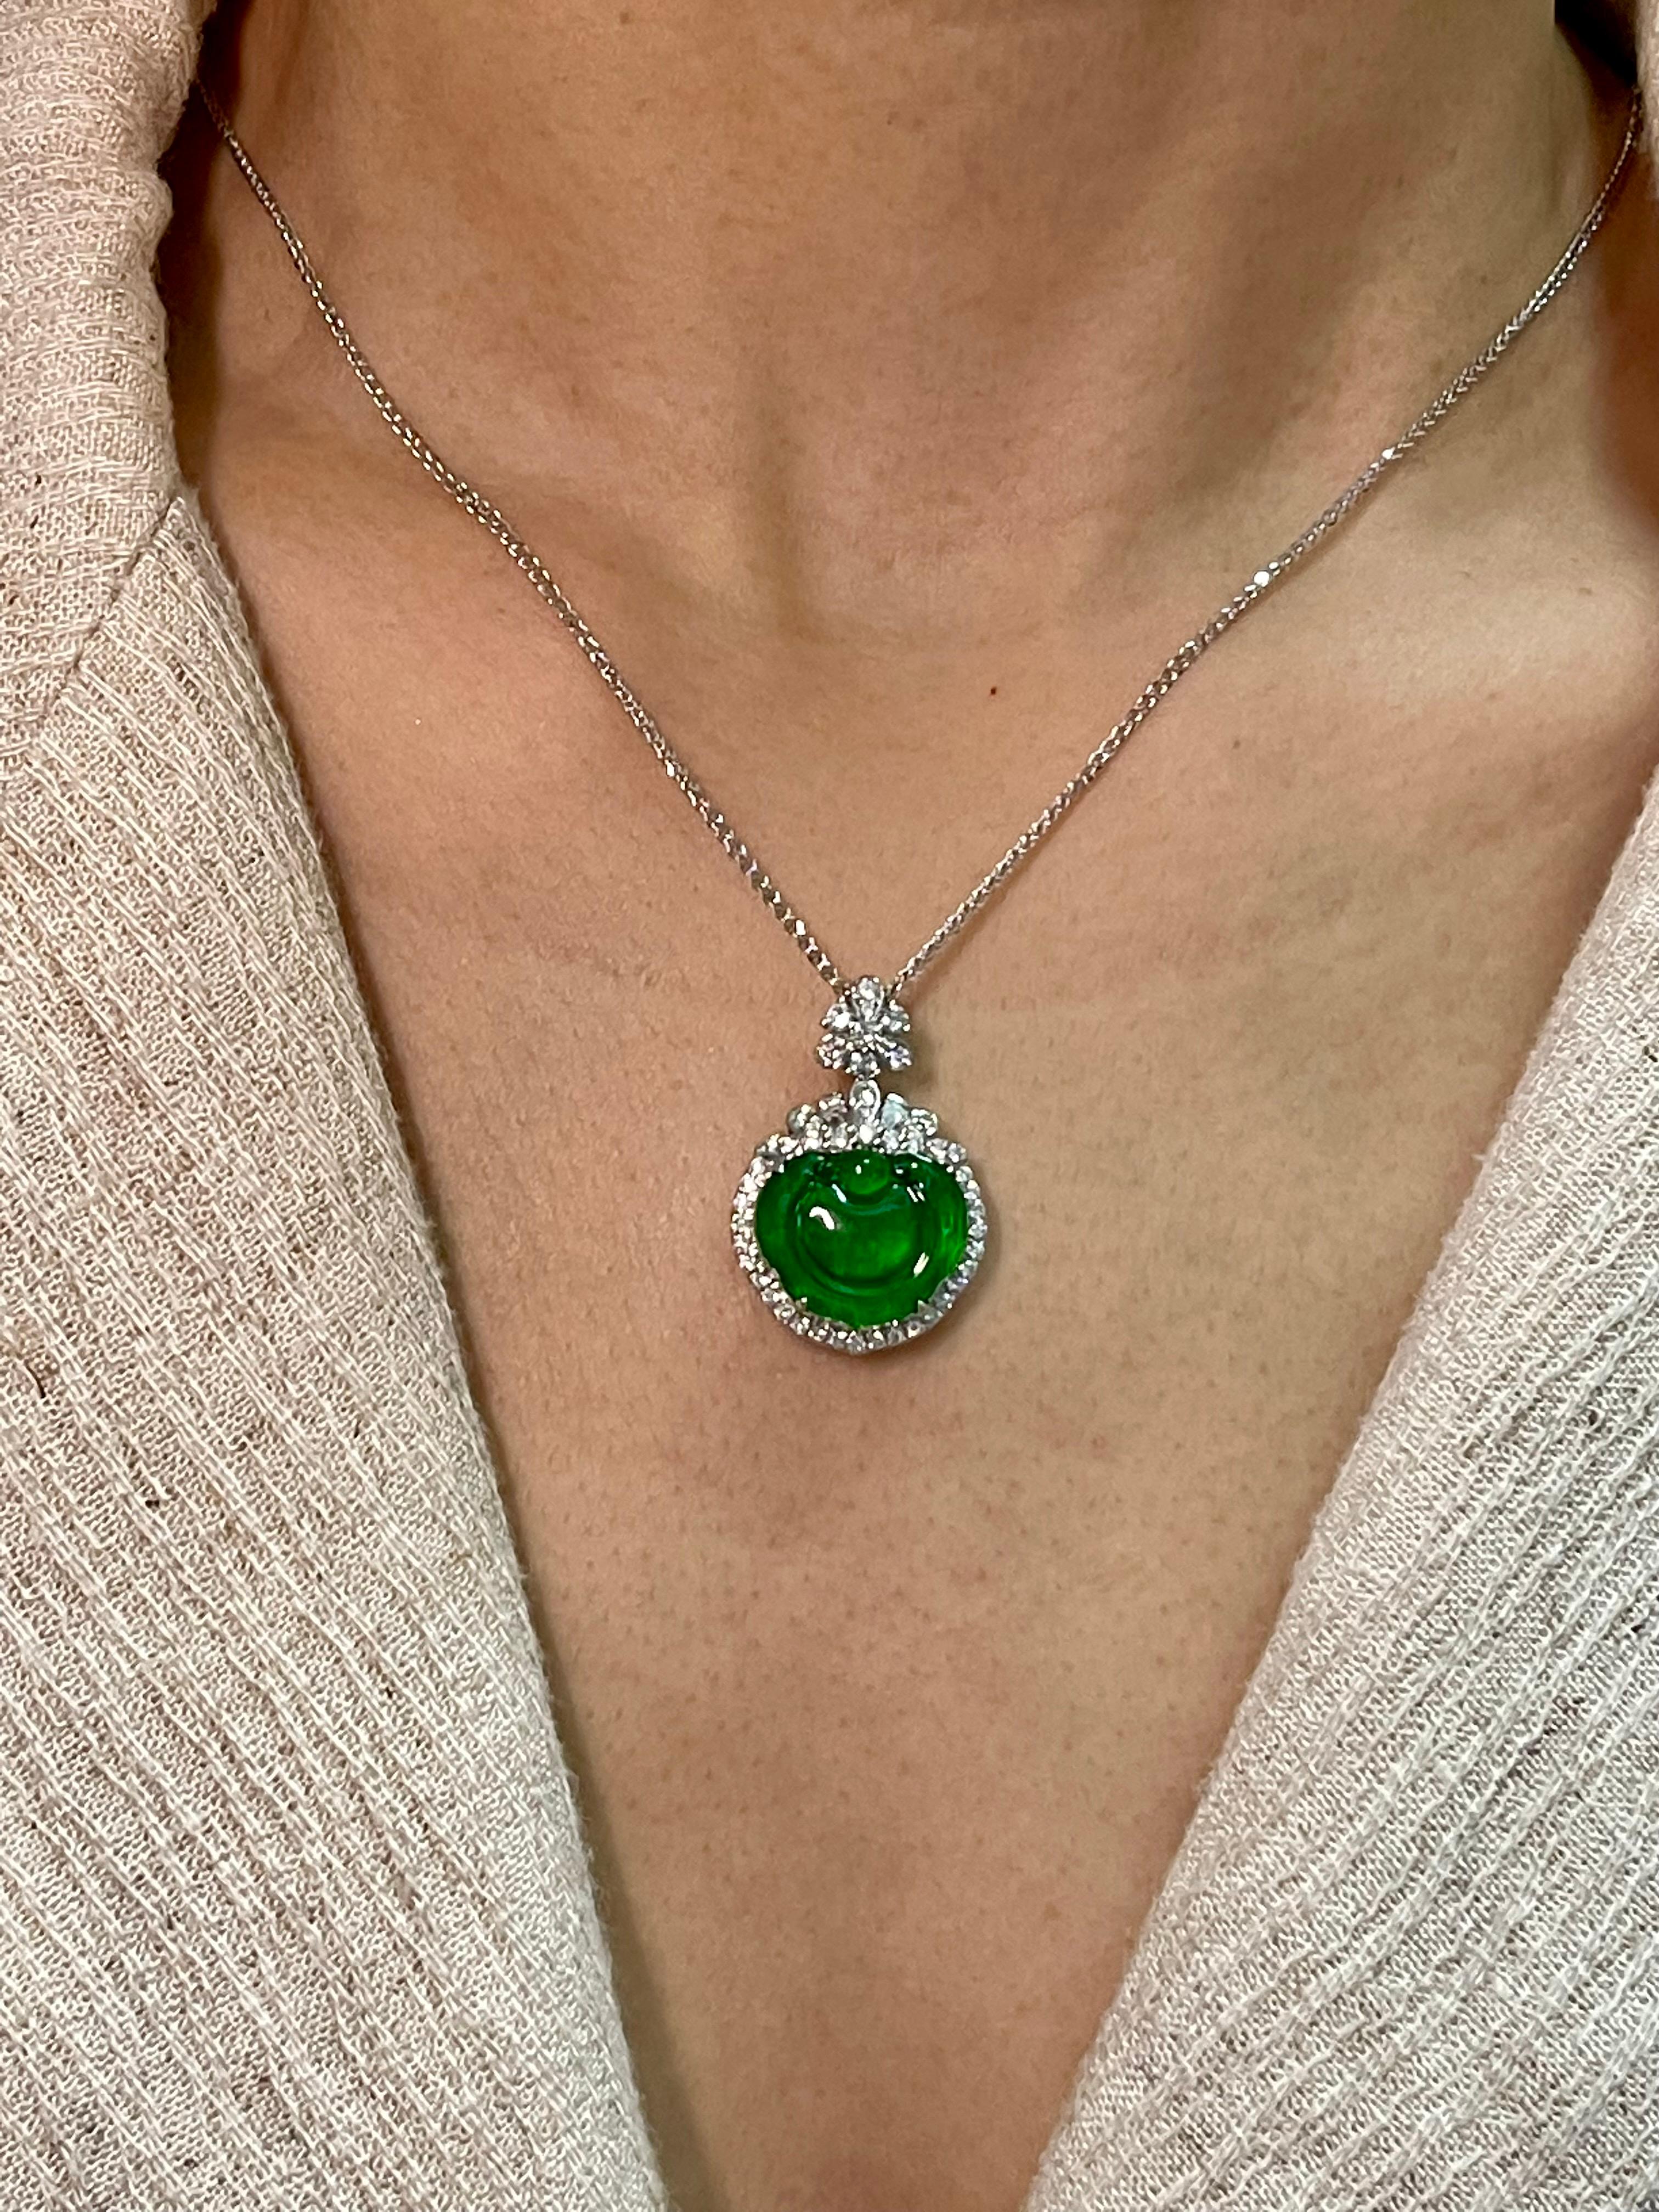 Certified Type A Icy Jade & Diamond Pendant Necklace, Glowing Apple Green Color For Sale 2